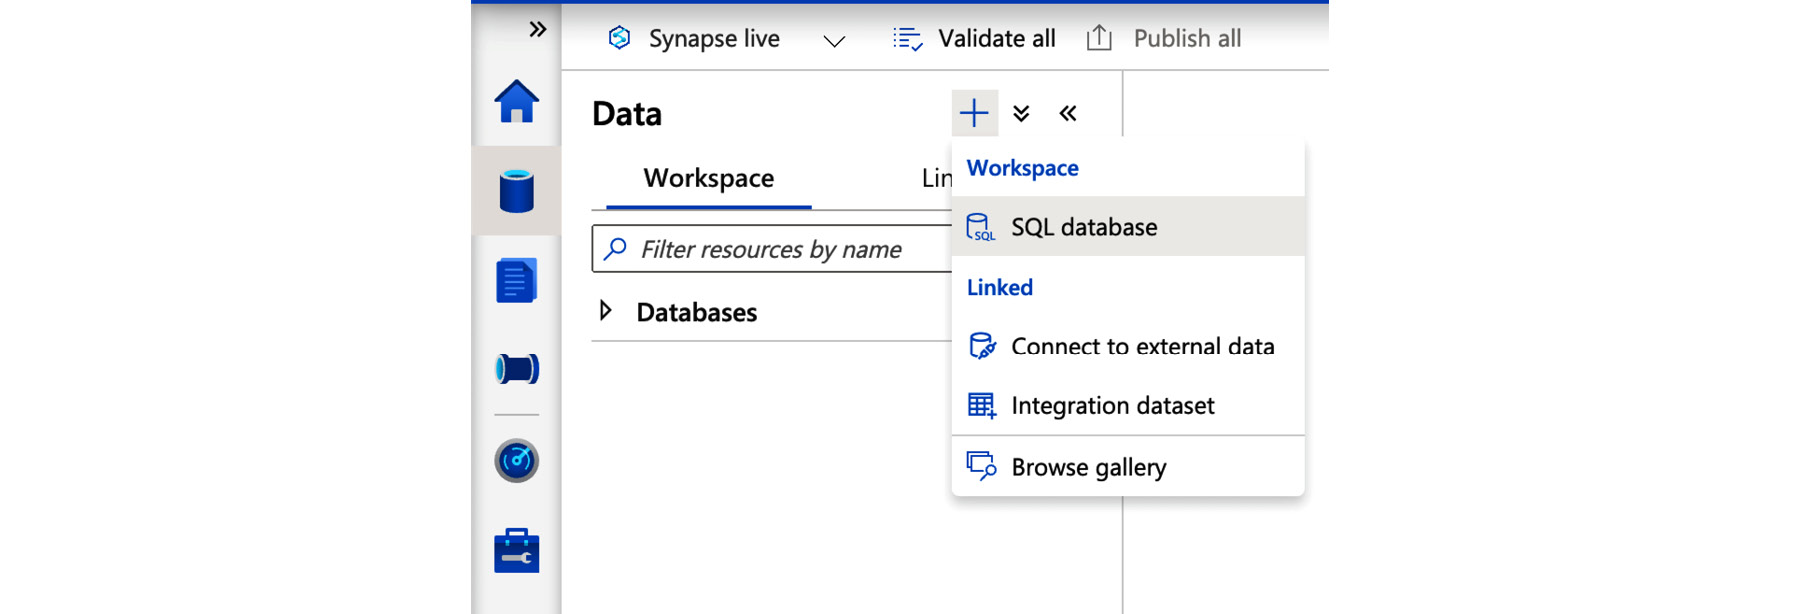 Creating an SQL database in Synapse Studio